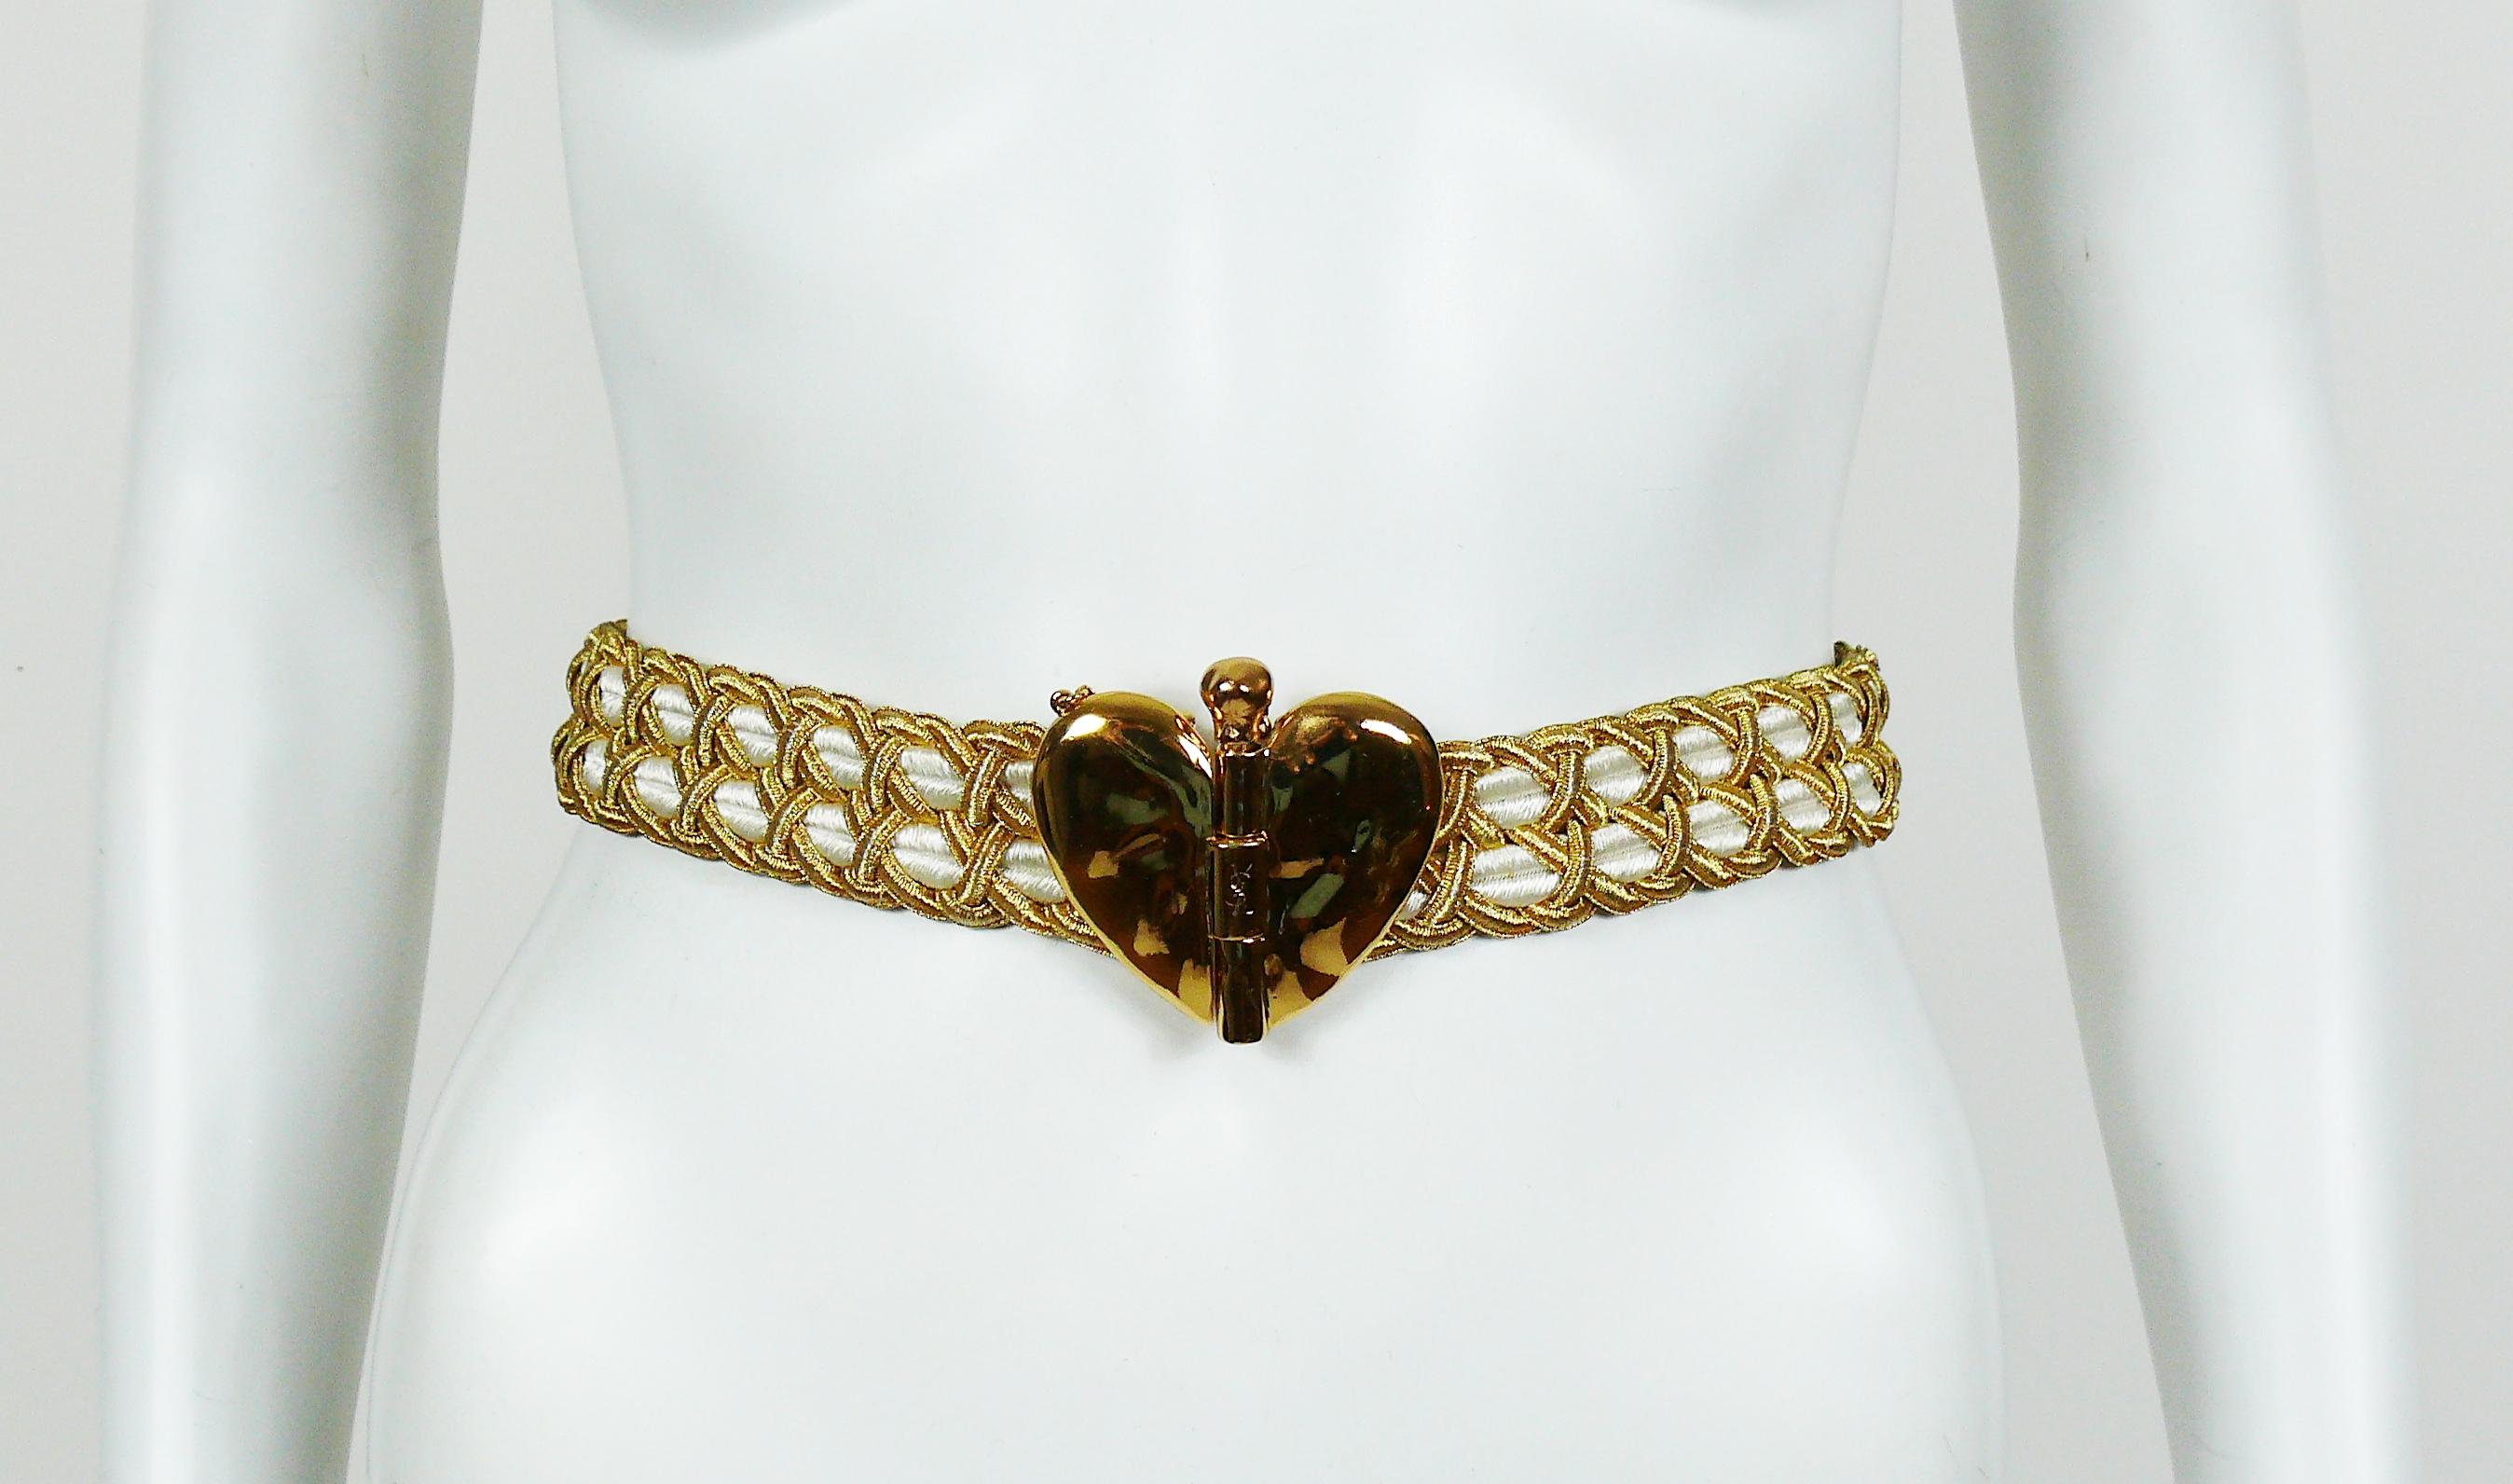 YVES SAINT LAURENT vintage gold and white passementerie belt featuring a large gold toned heart buckle.

Embossed YSL.

Indicative measurements : length approx. 79.5 cm (31.30 inches) / strap width approx. 3 cm (1.18 inches) / buckle approx. max.